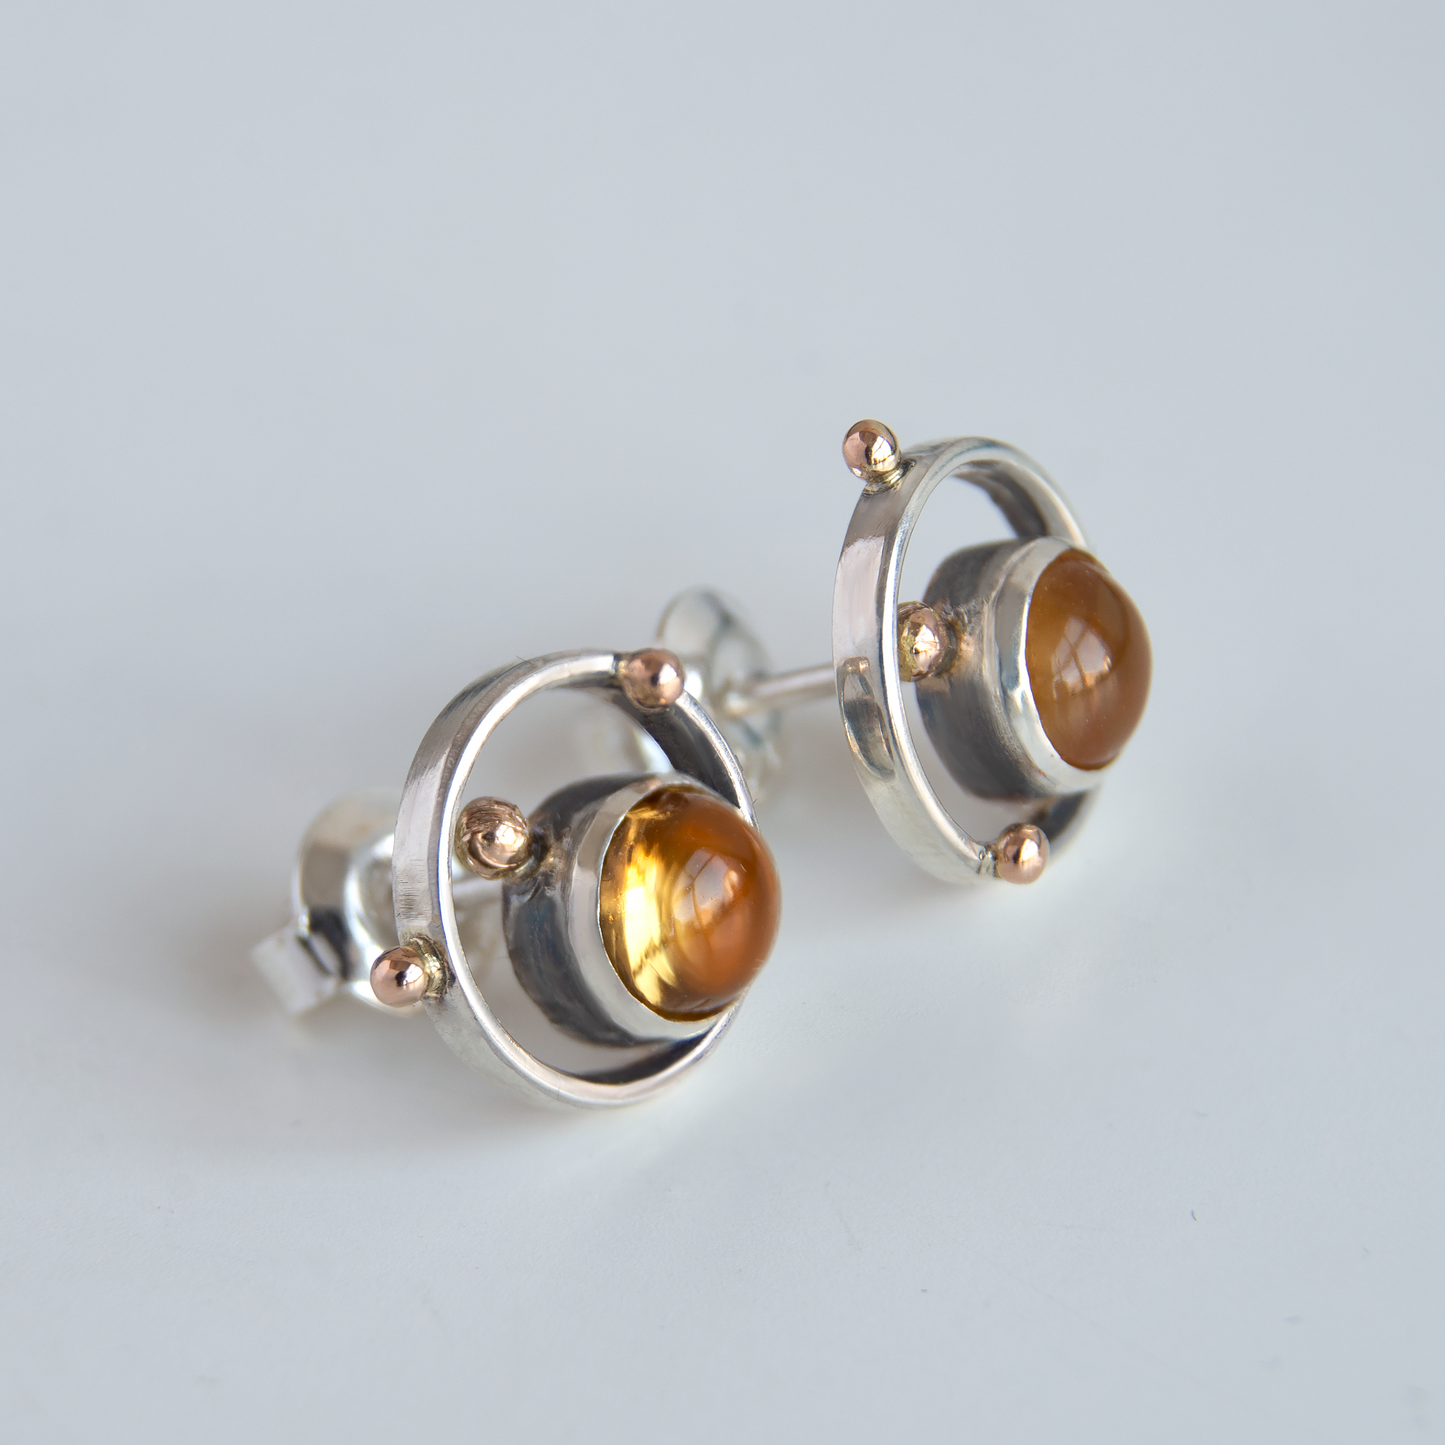 Round Frame Earrings With Gold Beads And Citrine Stones